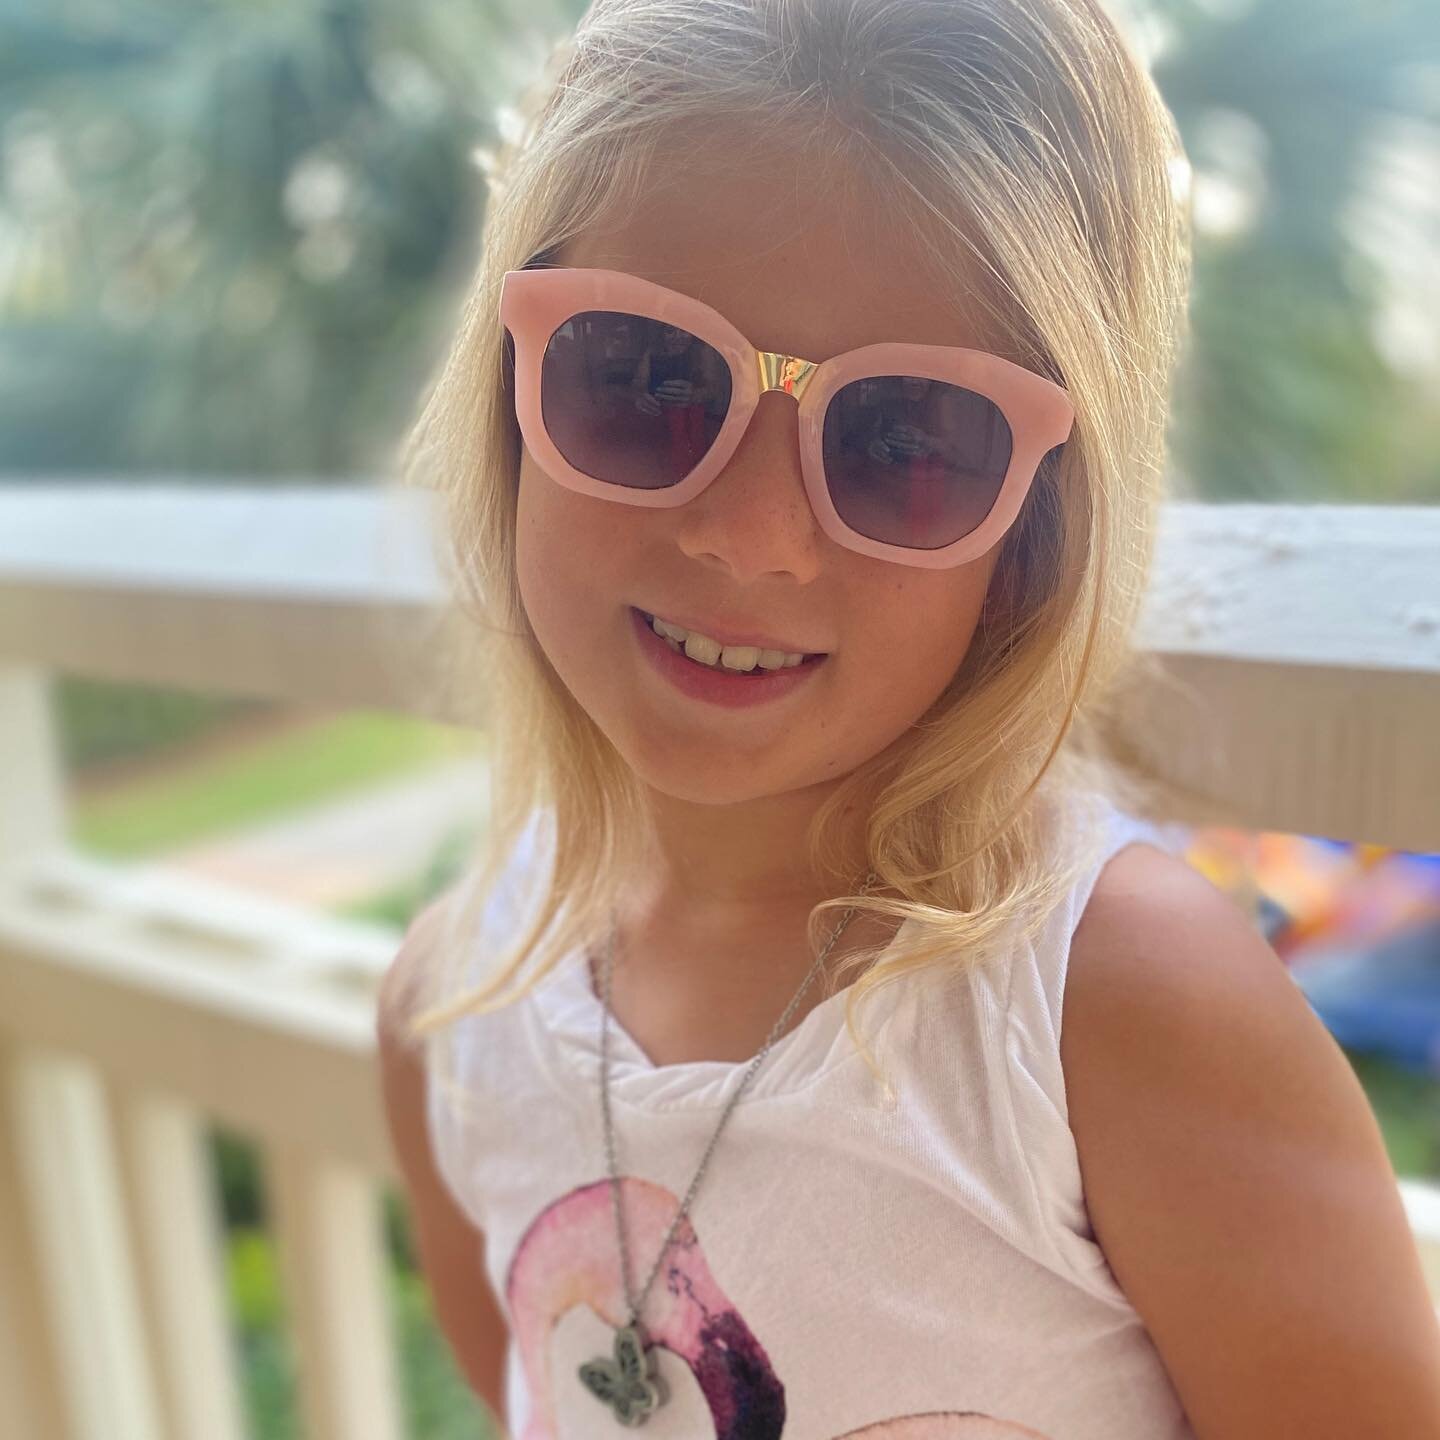 A few more hours to order your aromatherapy jewelry from @miasmagic.co for your favorite little girl... &amp; support Sideline Pass&rsquo; Scholarship Fund at the same time! Doesn&rsquo;t Sophie look fabulous in Mia&rsquo;s Butterfly Necklace filled 